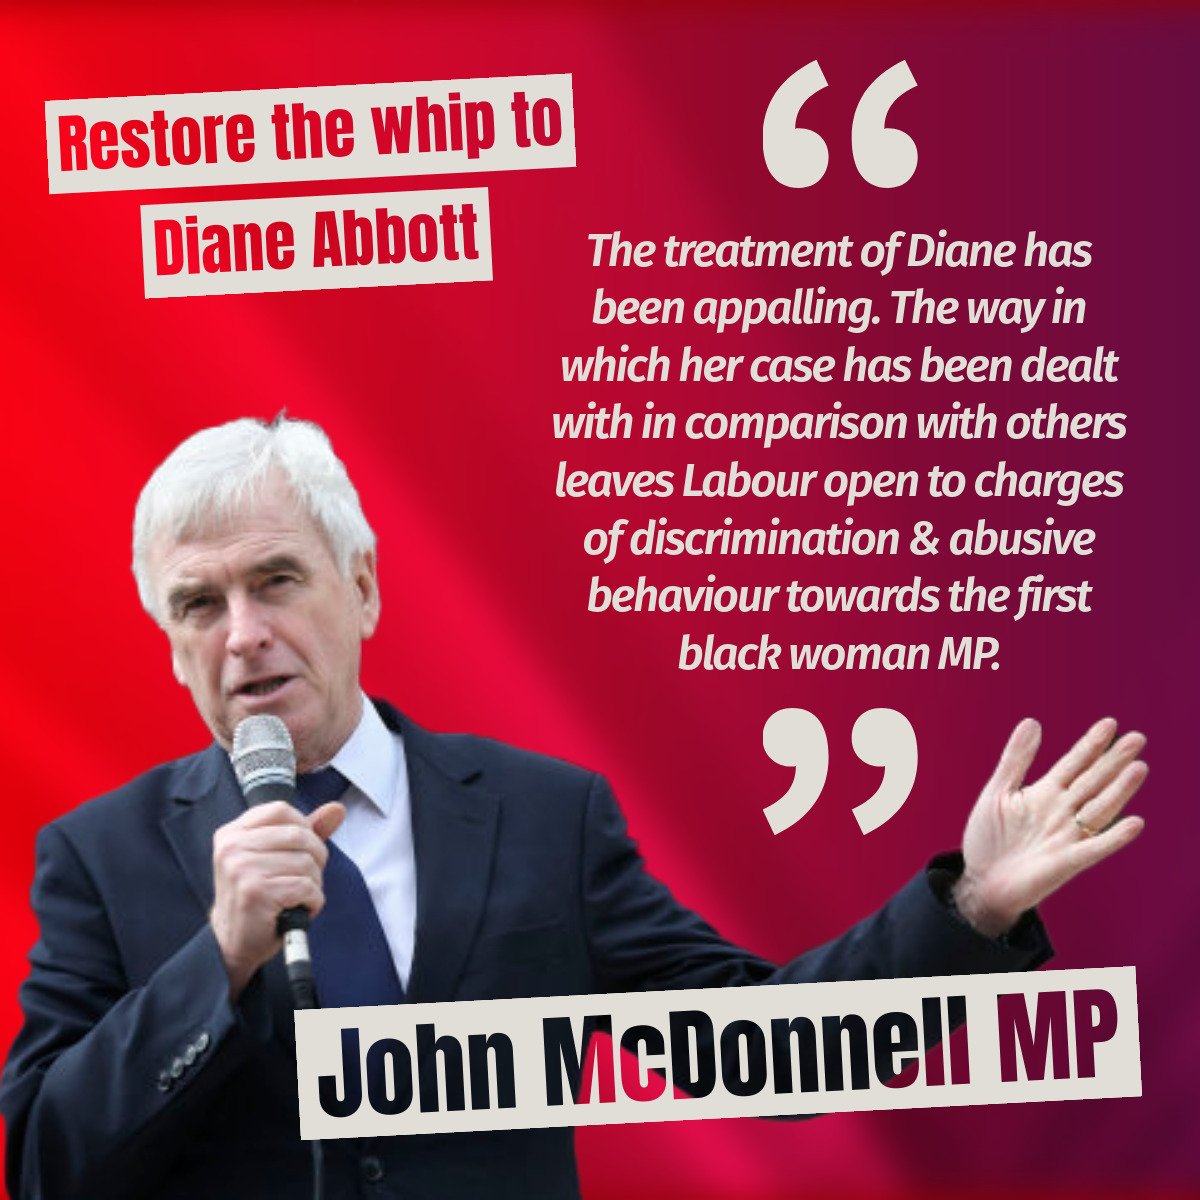 Former Shadow Chancellor @JohnMcDonnellMP on the shameful treatment of fellow anti-austerity voice in Parliament @HackneyAbbott- you can join over 12,500 people in signing this petition calling for the party leadership to #RestoreTheWhip to Diane here: actionnetwork.org/petitions/rest…